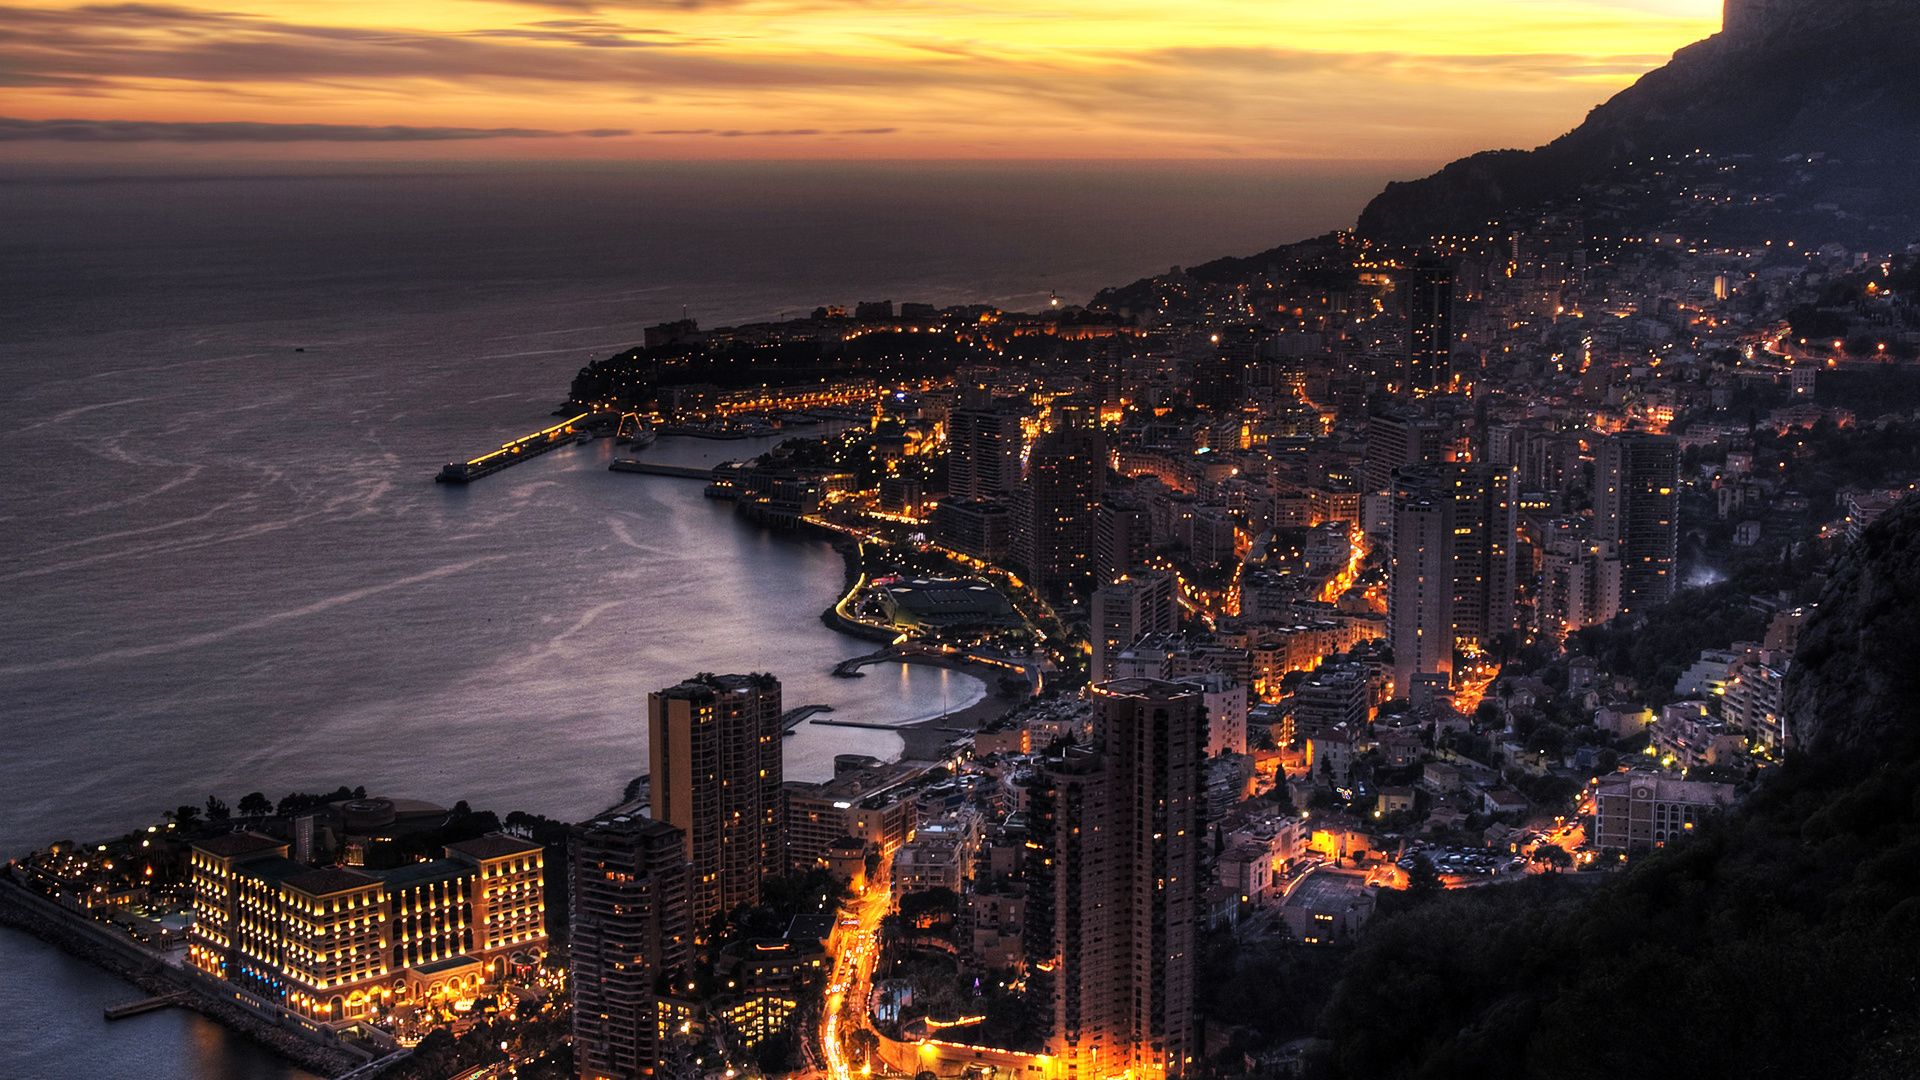 View from the hill on the Monaco wallpaper - Beach Wallpapers